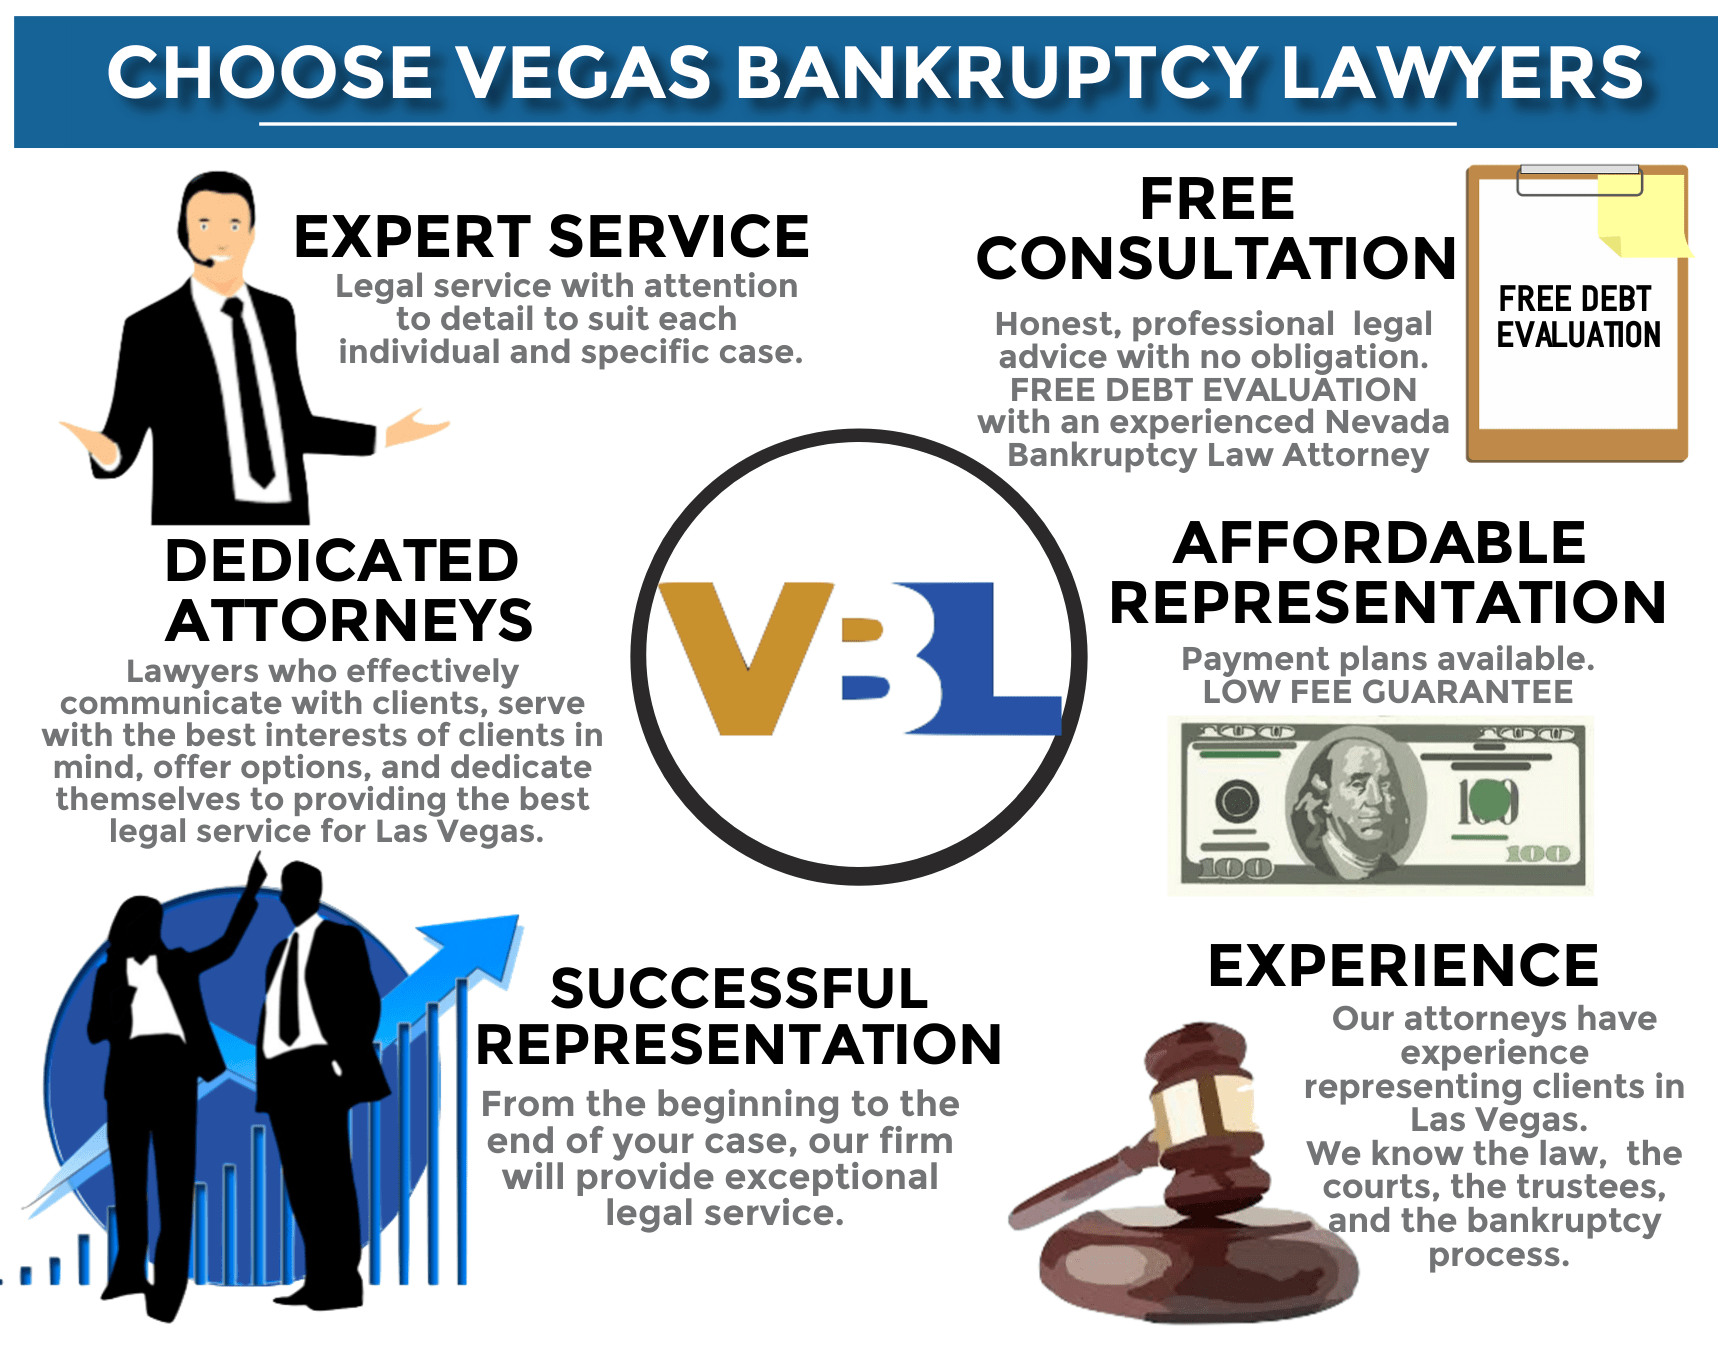 Why Choose Vegas Bankruptcy Lawyers